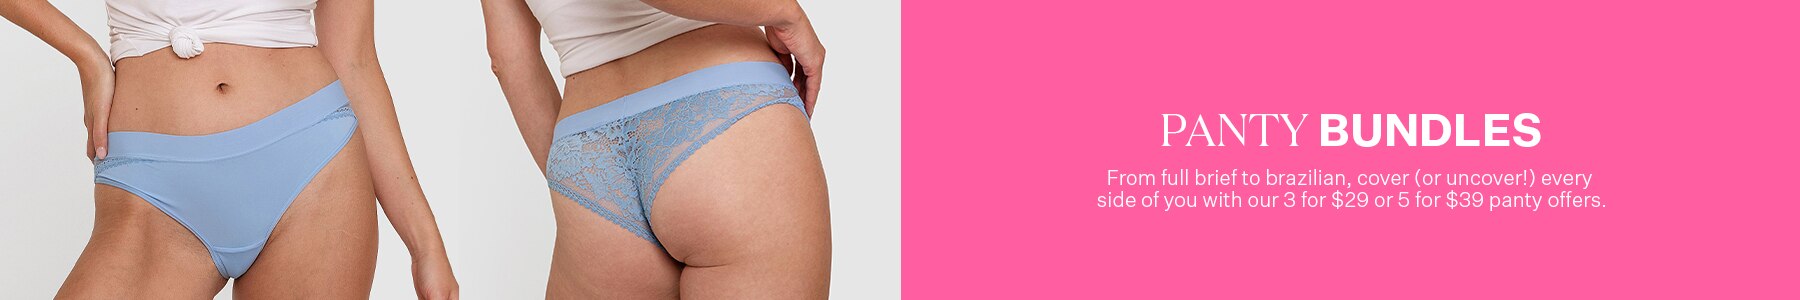 Panty Bundles. From full brief to brazilian, cover (or uncover!) every side of you with our 3 for $20 or 5 for $39 panty offers.